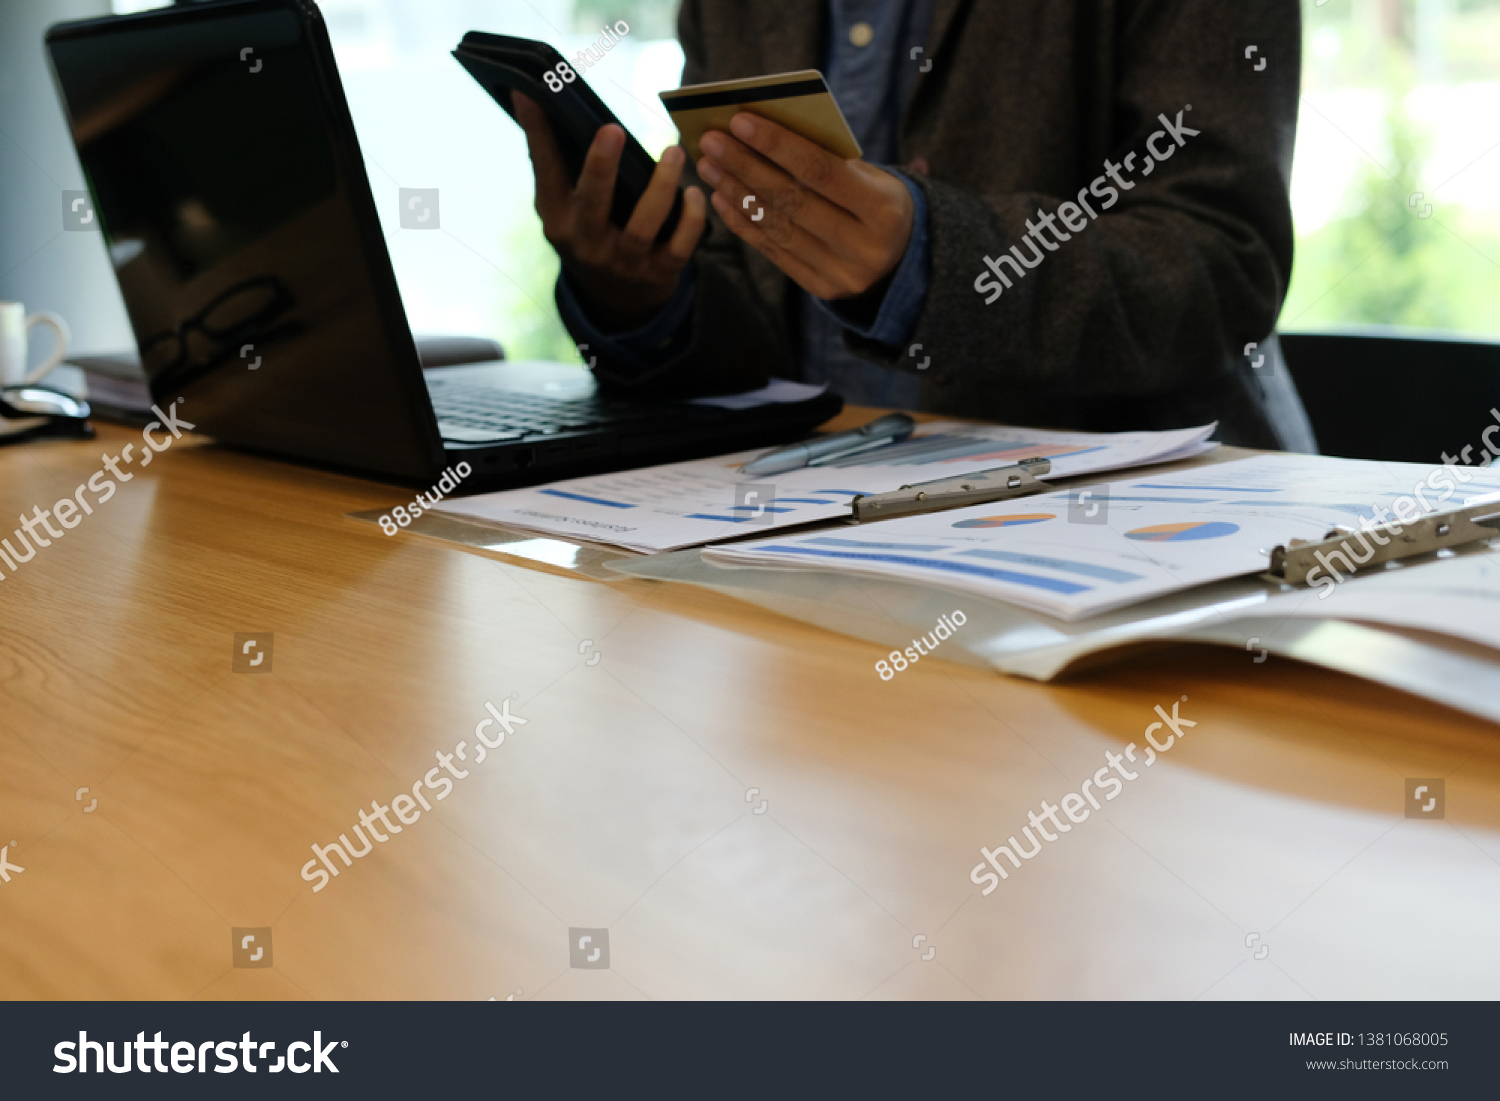 man holding credit card using smart phone for online shopping. businessman purchase product from internet, make payment on bank website at workplace #1381068005